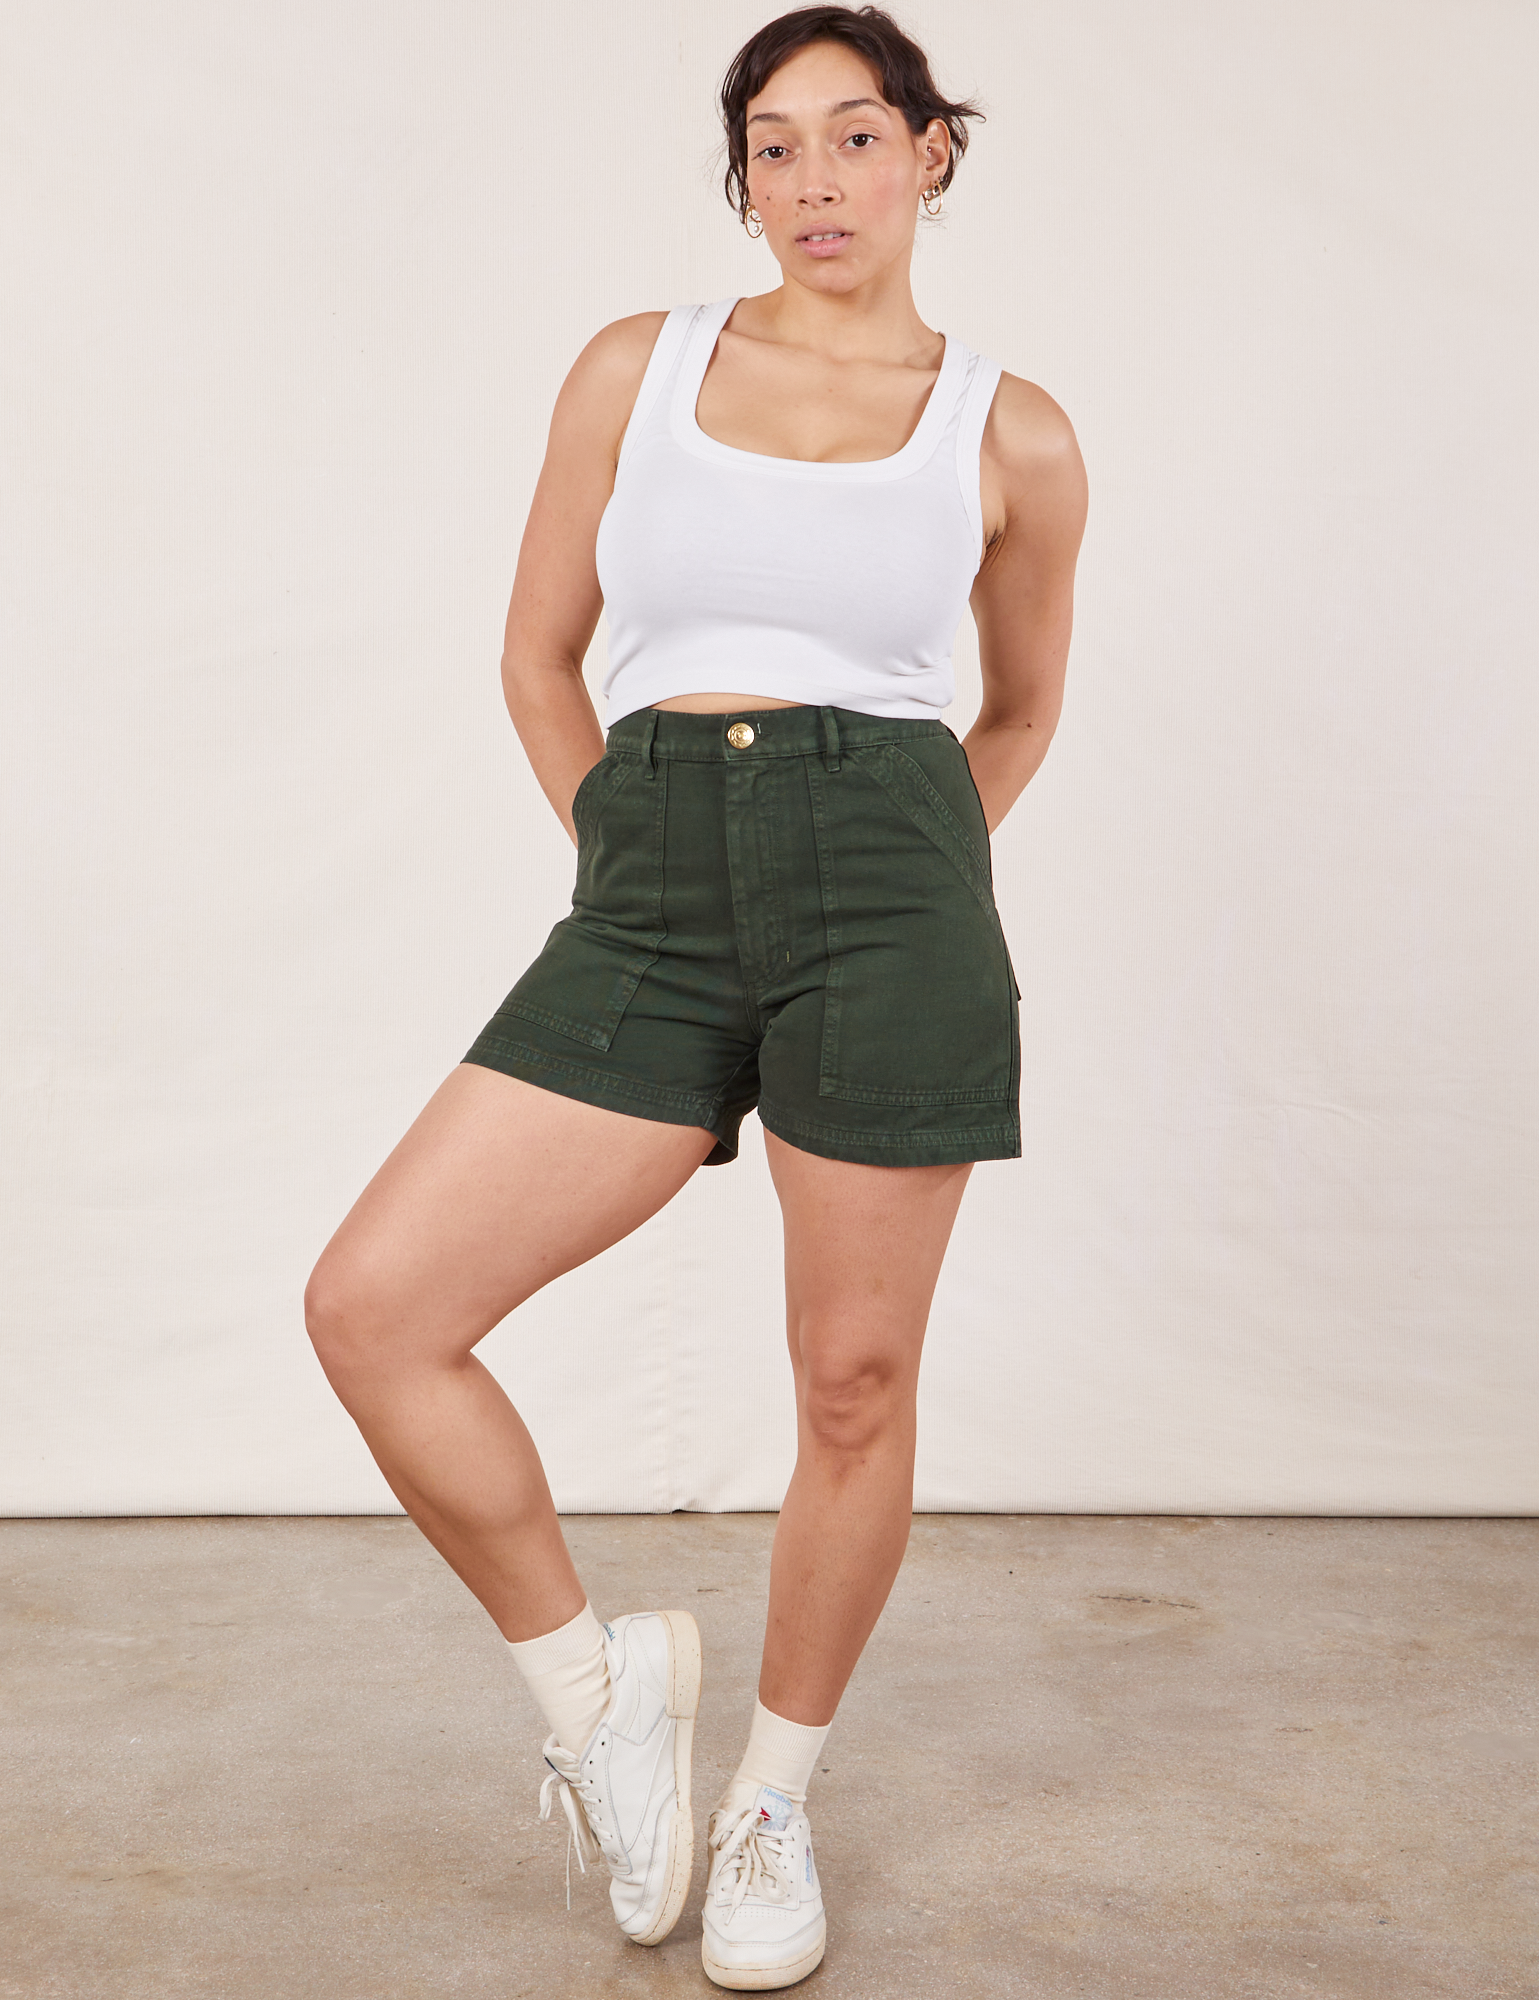 Tiara is wearing Classic Work Shorts in Swamp Green and a Cropped Tank Top in vintage tee off-white